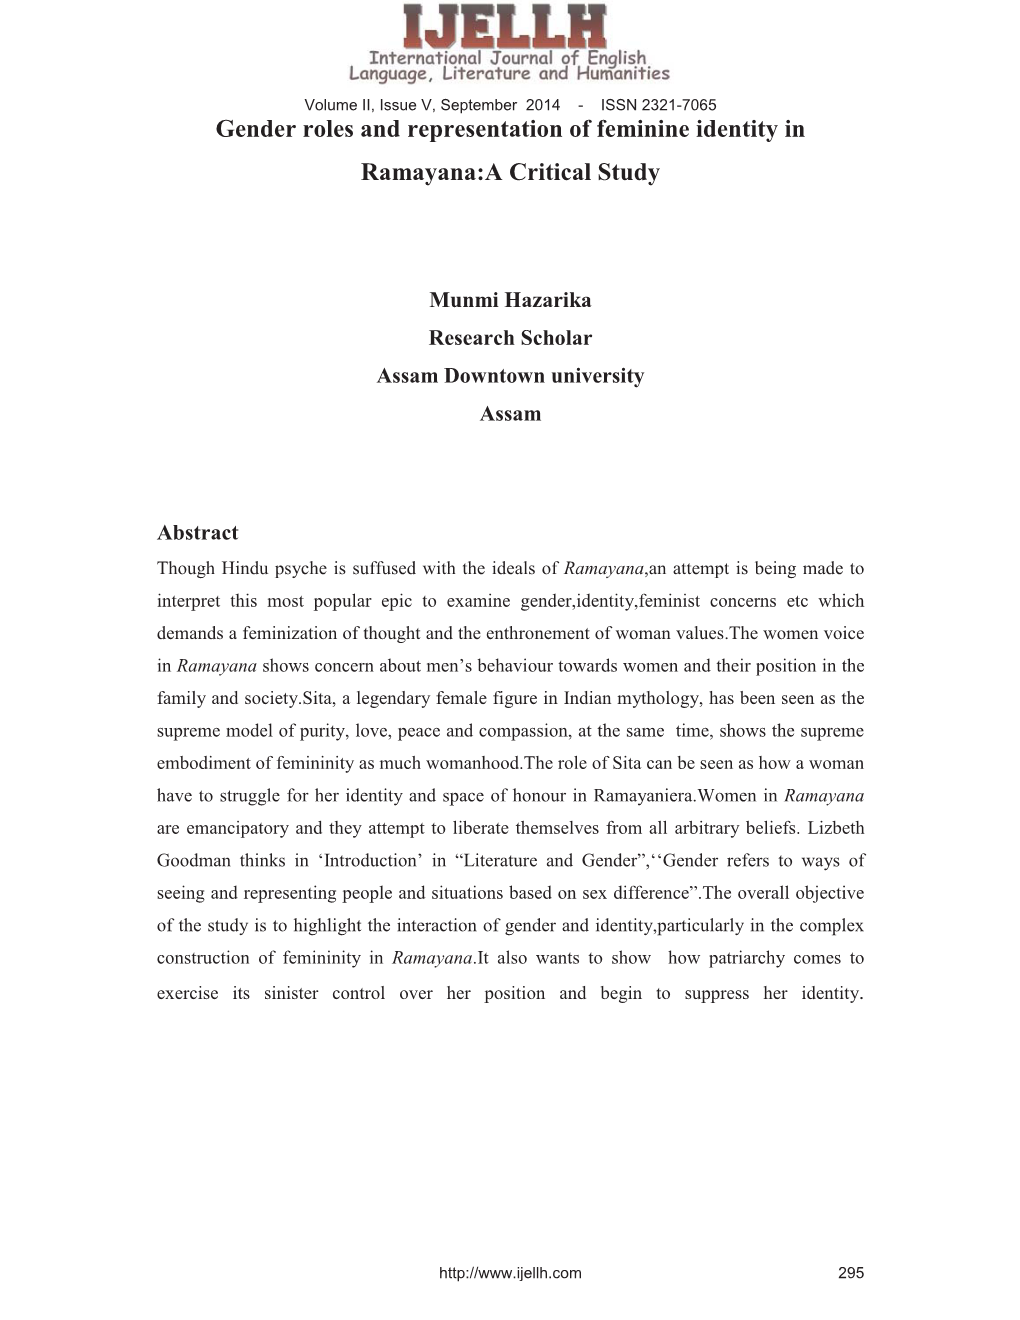 Gender Roles and Representation of Feminine Identity in Ramayana:A Critical Study